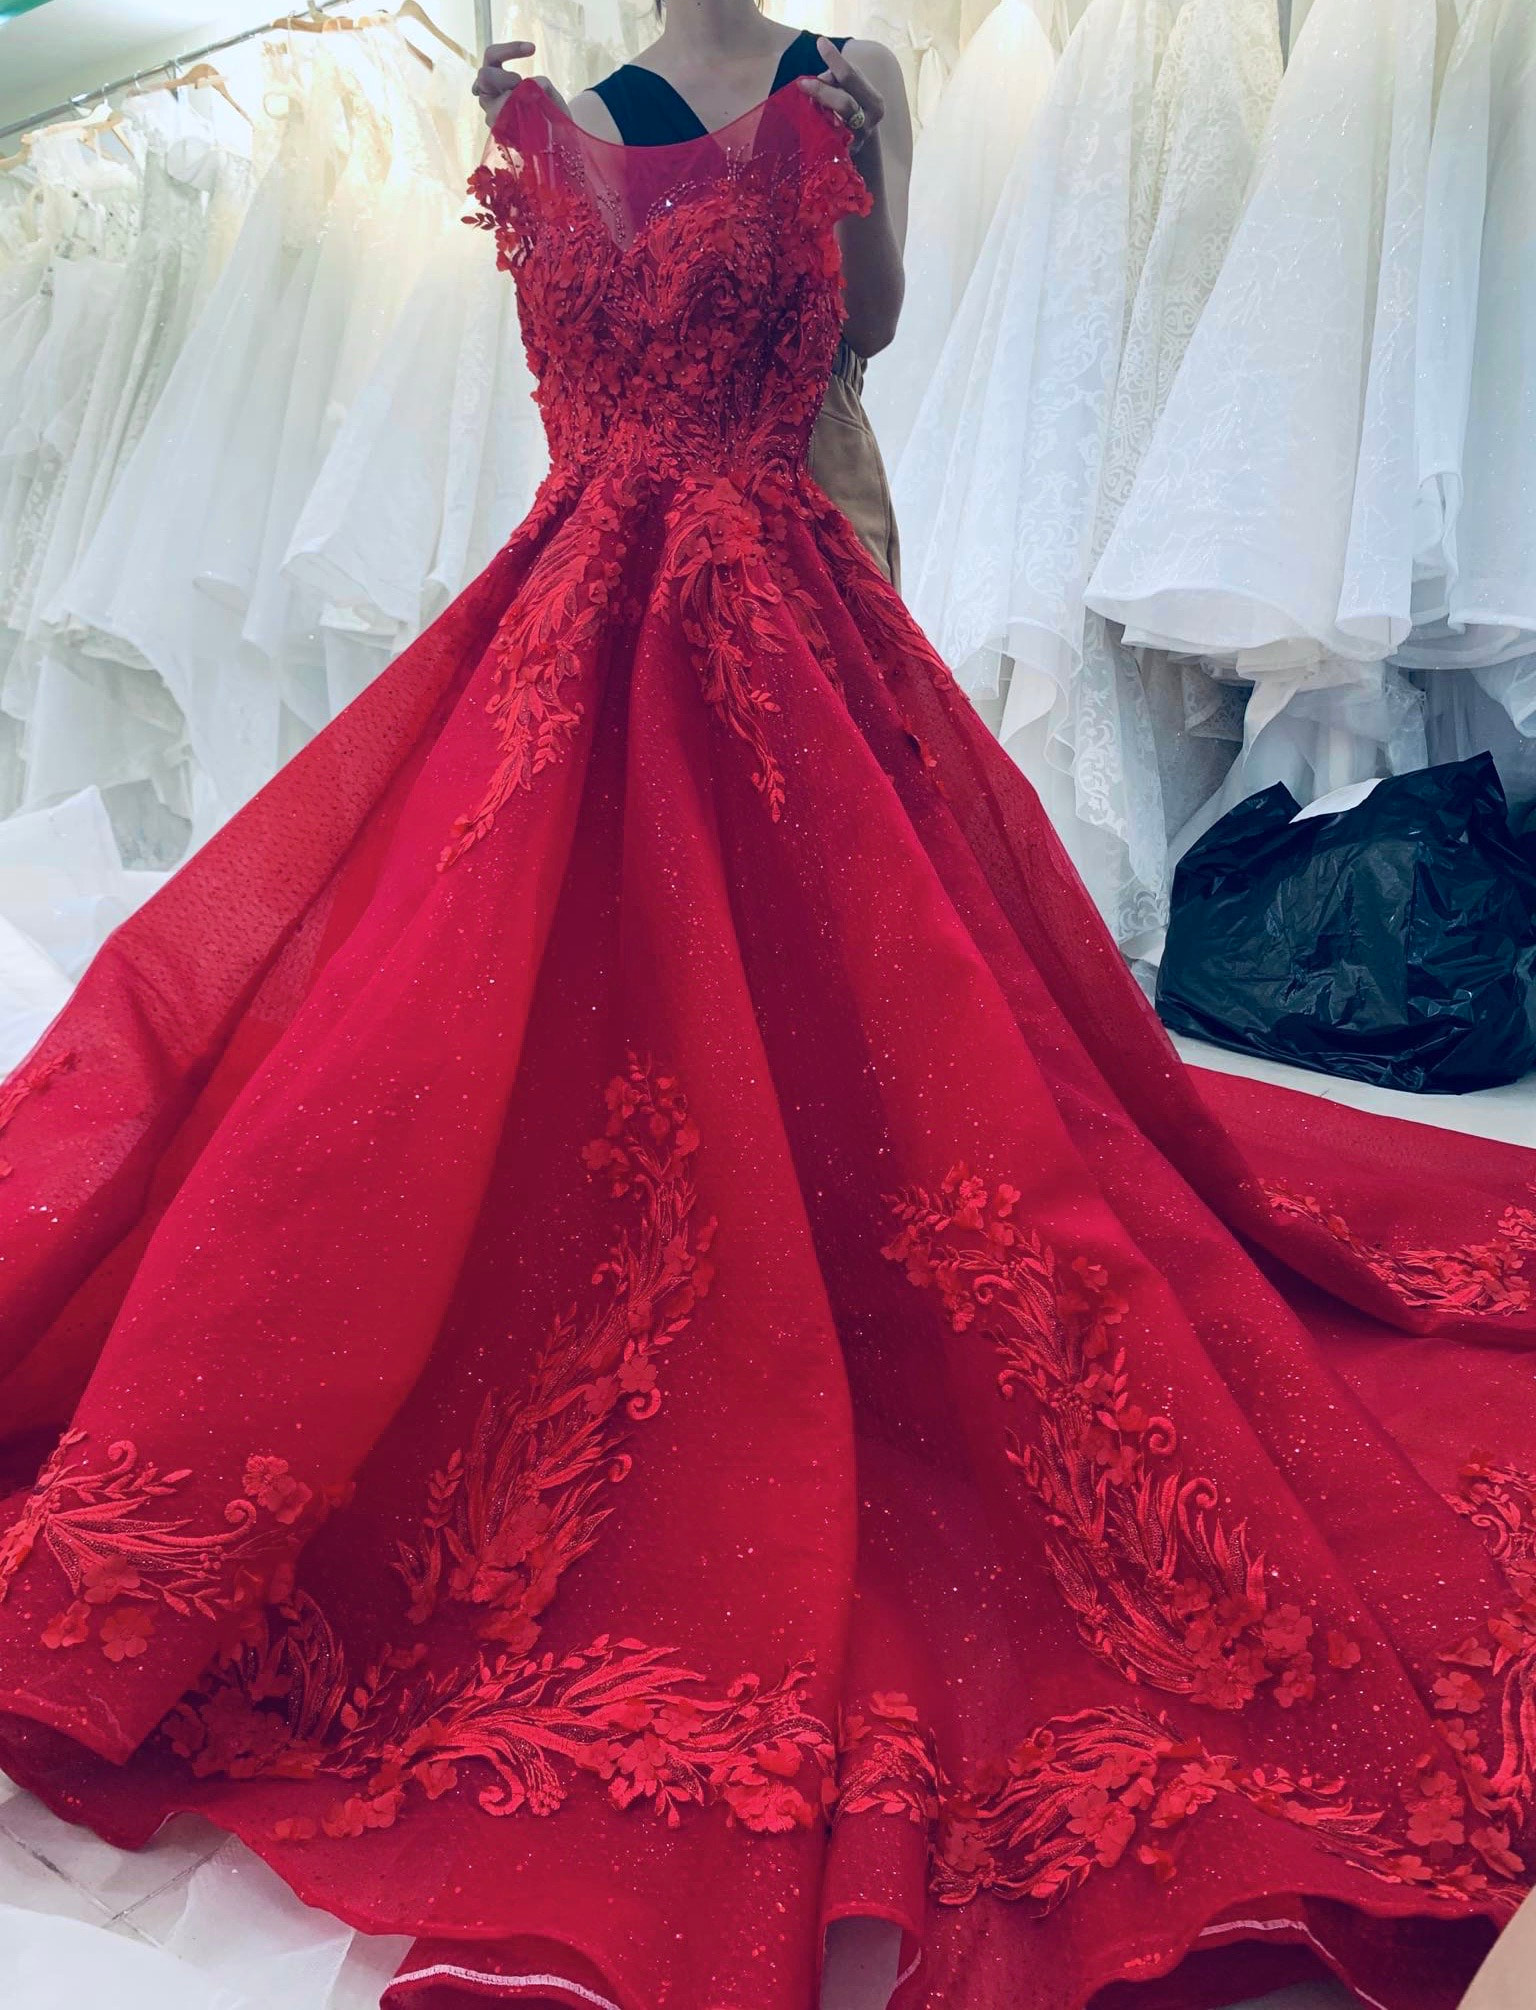 jernbane stereoanlæg Orient Enchanting red rose floral lace applique beaded princess wedding ball gown  dress with chapel train